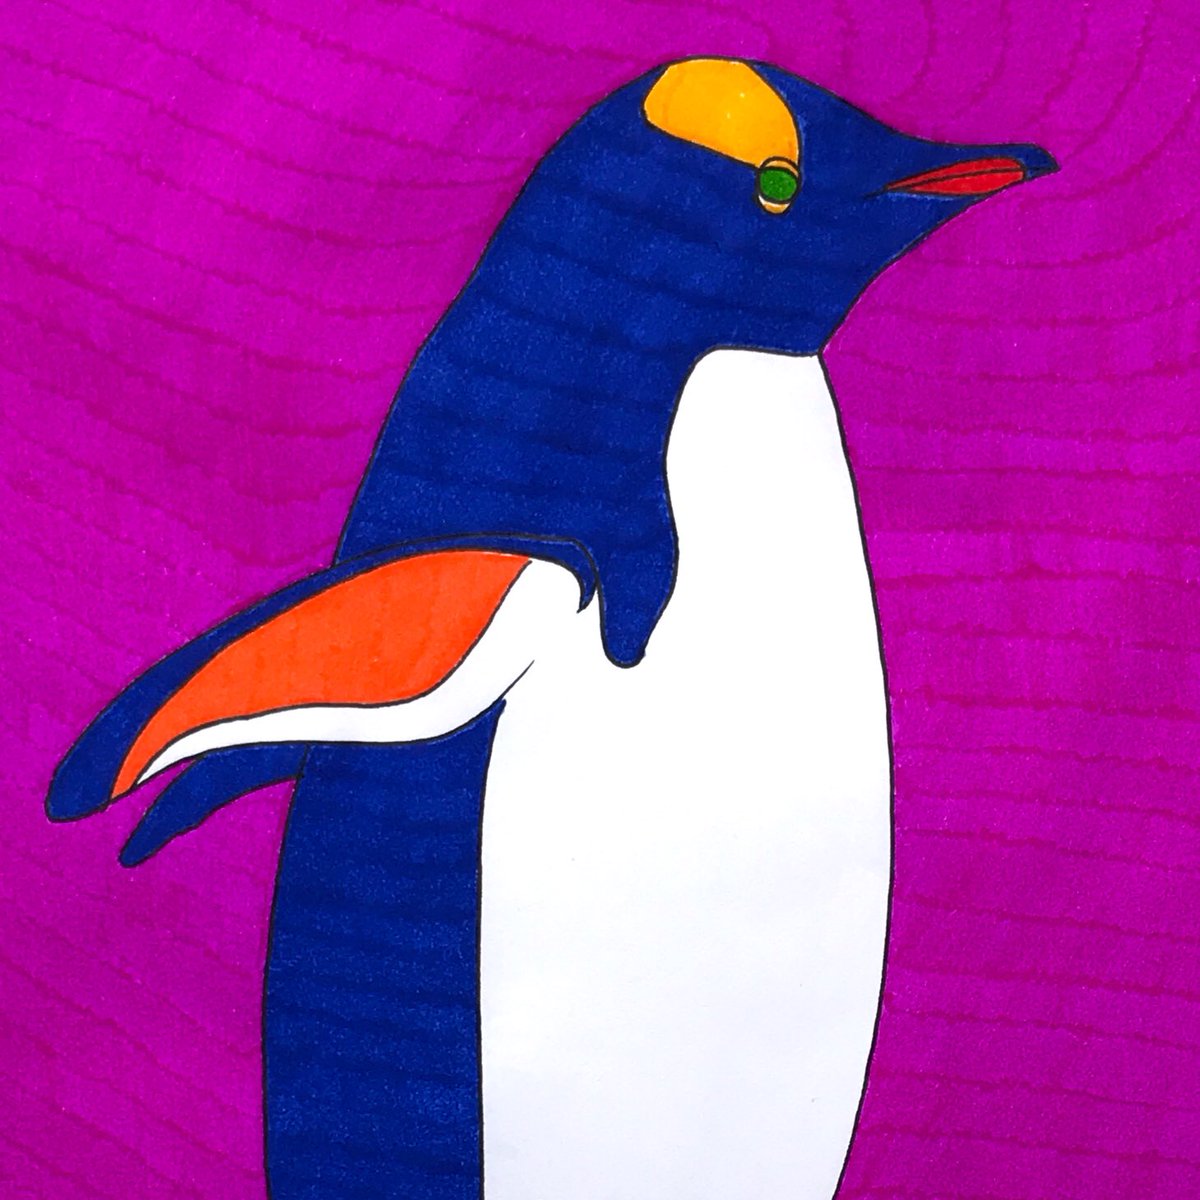 Normally I sell individual drawings for €150 so it’s a pretty good deal to get two for just €50. The offer ends when I either run out of drawings, run out of packaging (due to the lockdown) or reach the 30th April.The Determined Penguin (2020)